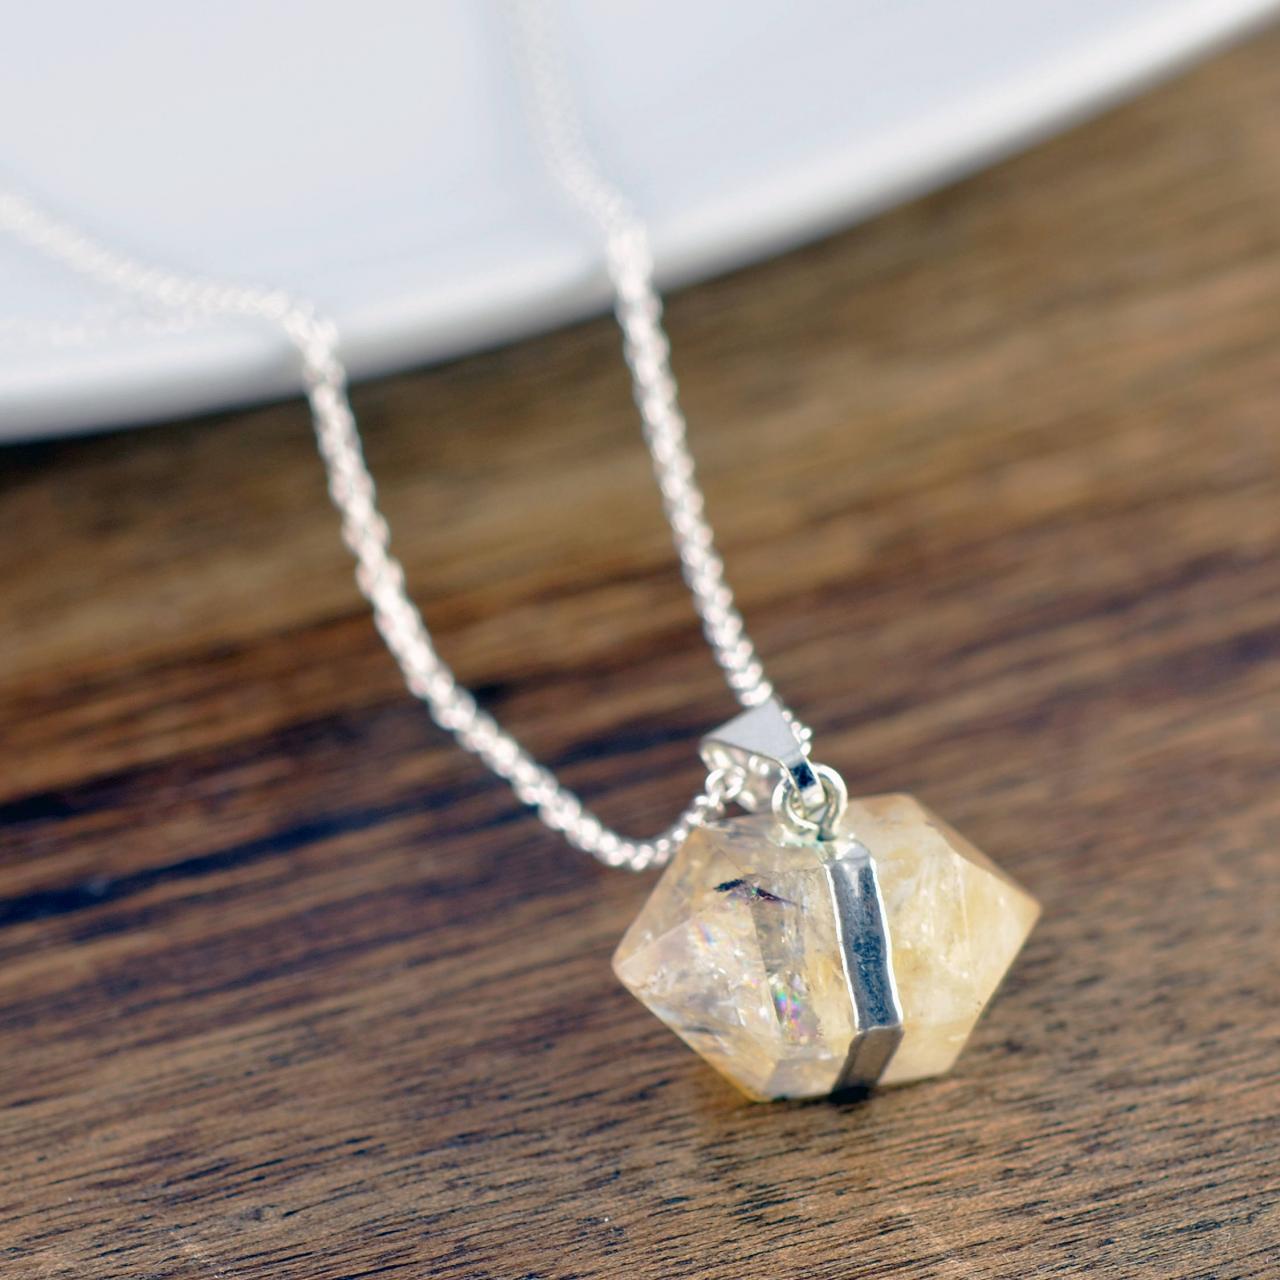 Citrine Crystal Necklace, Citrine Quartz Pendant, Crystal Jewelry, Citrine Jewelry, Gift For Wife, Gift For Girlfriend, November Birthstone